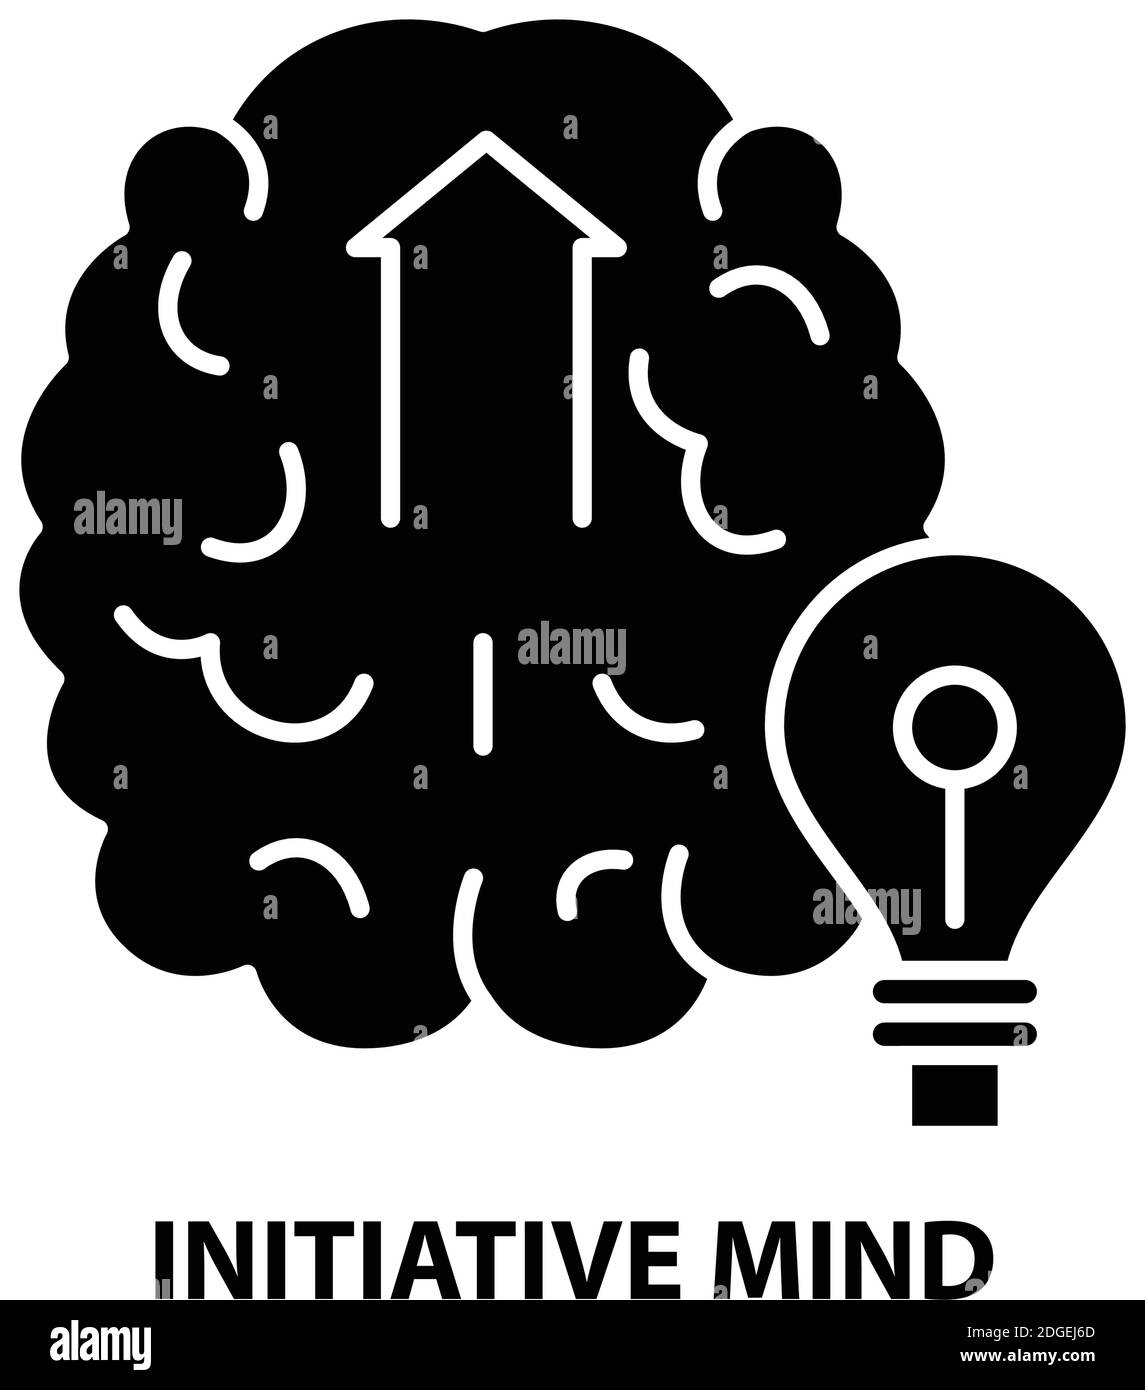 initiative mind icon, black vector sign with editable strokes, concept illustration Stock Vector